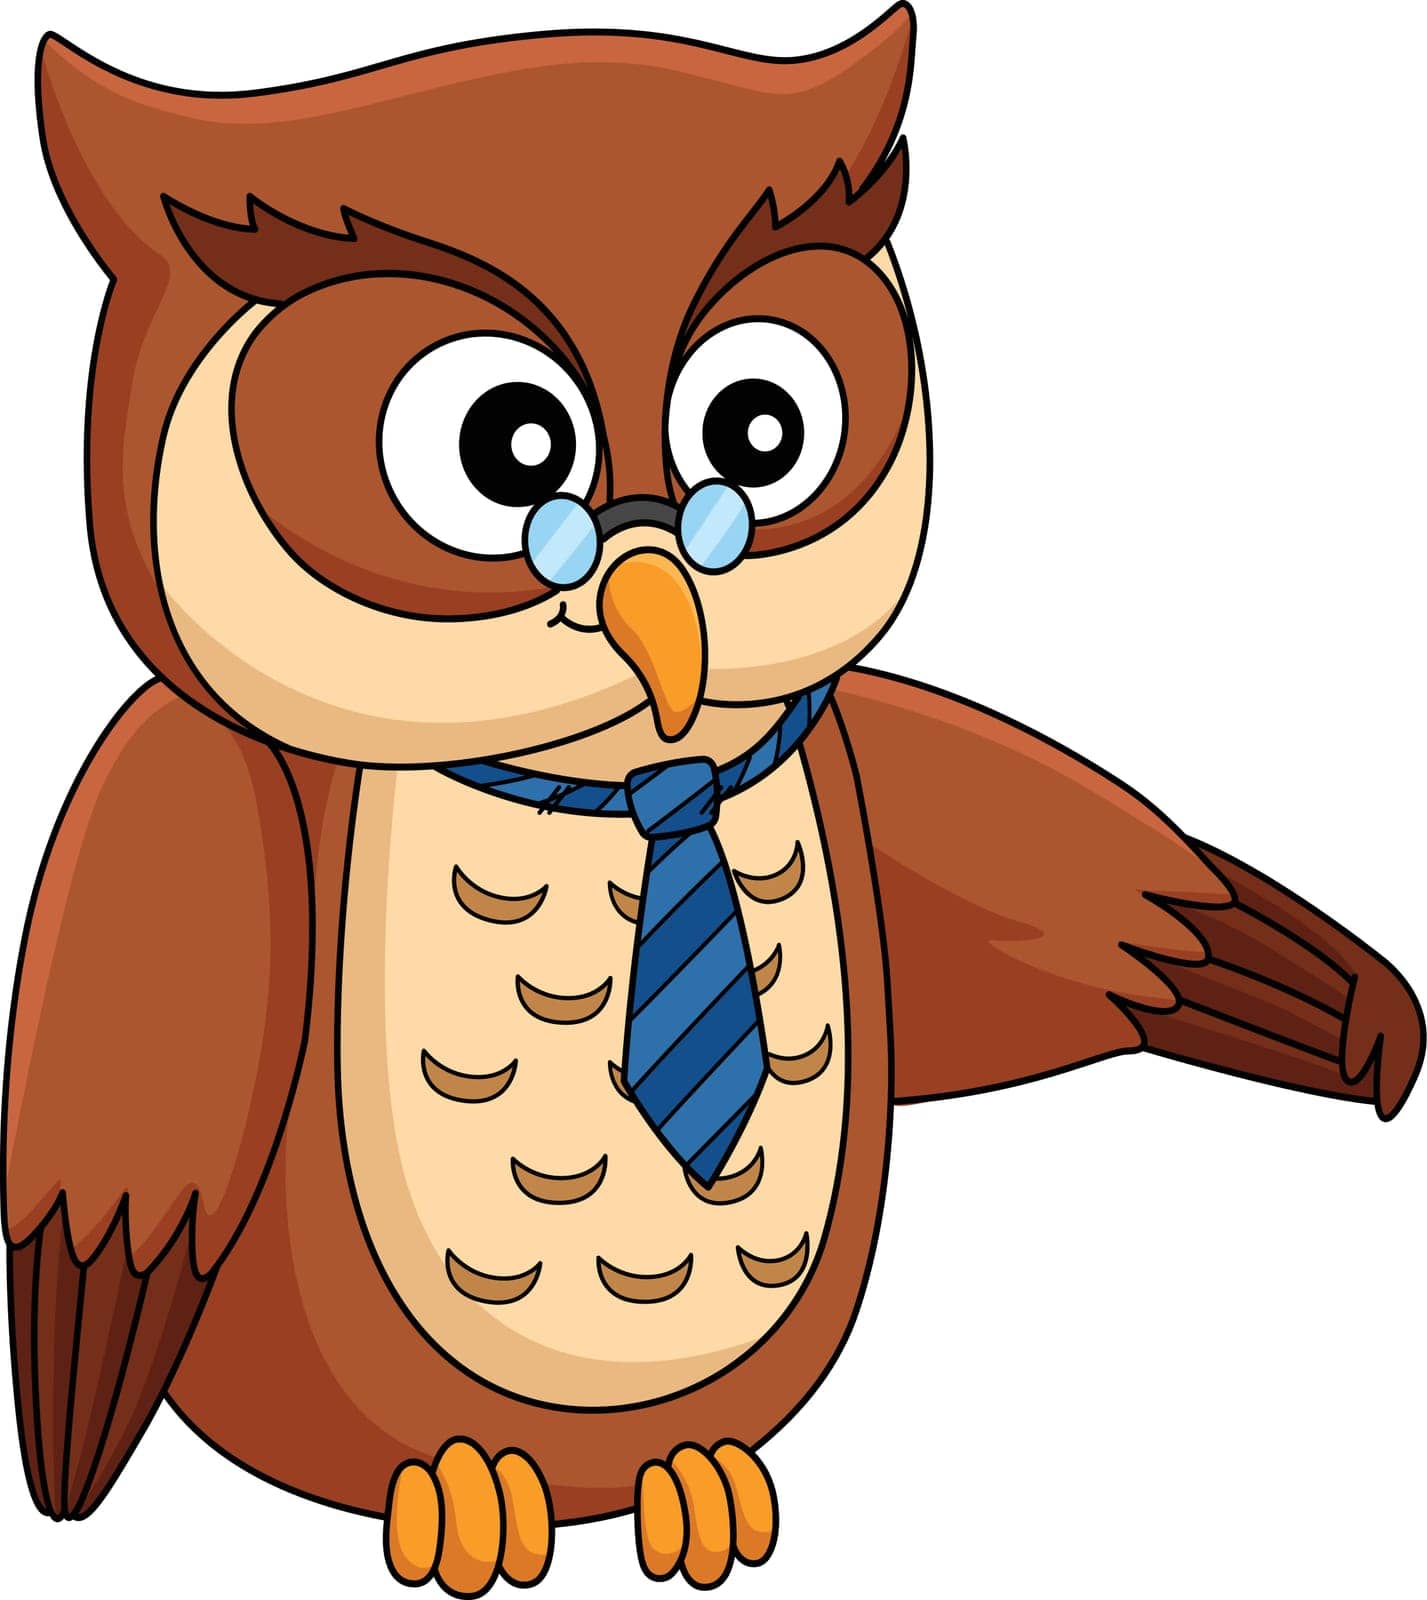 Owl with a Necktie Cartoon Colored Clipart by abbydesign